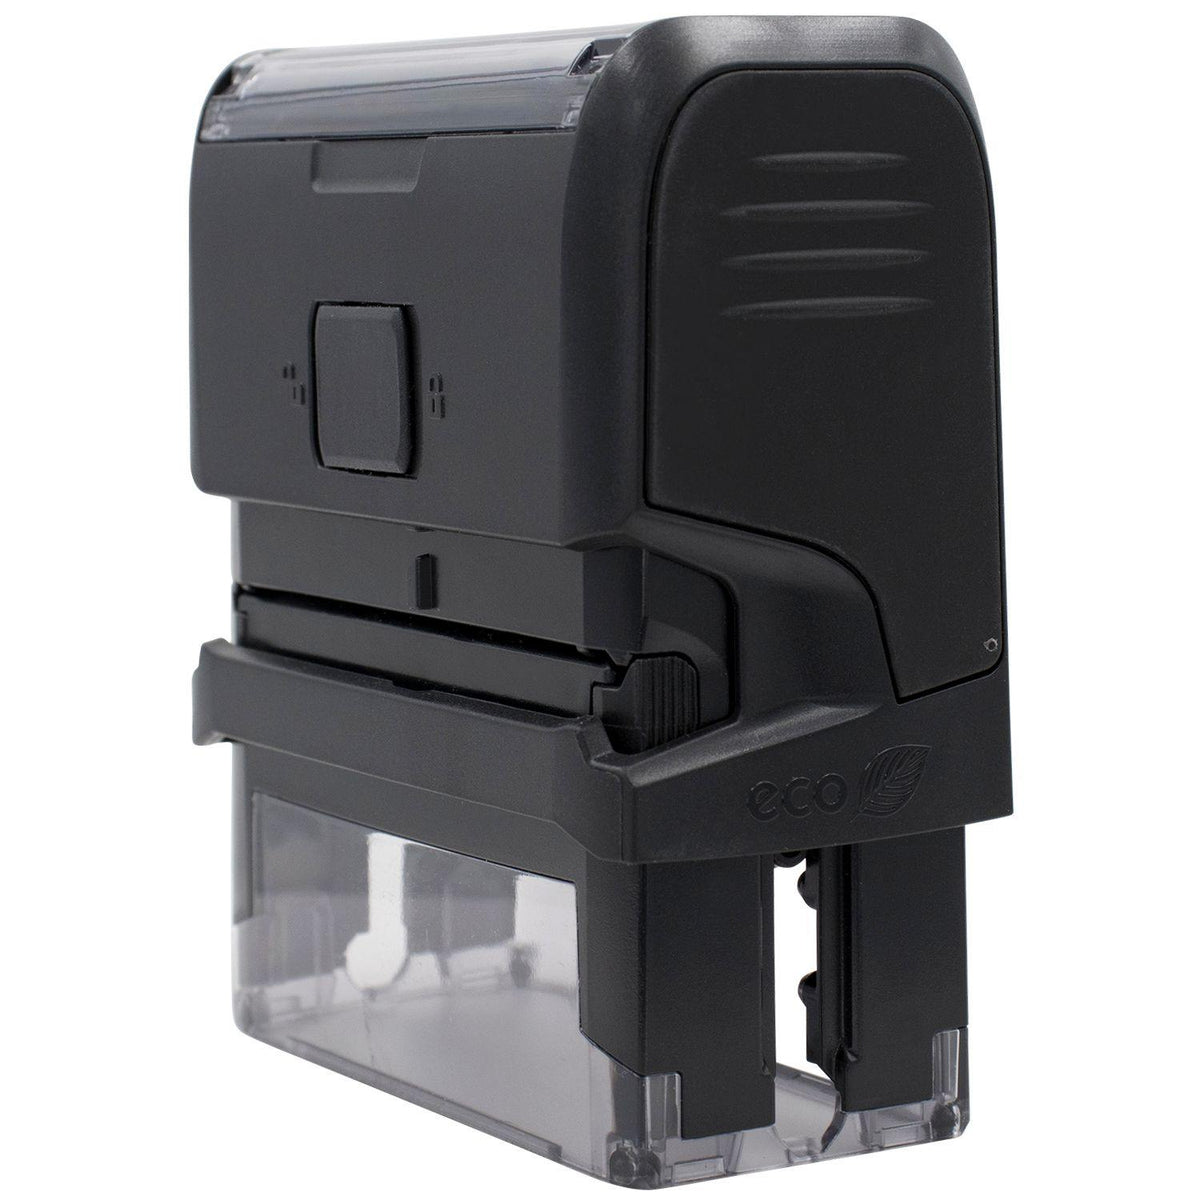 Large Self-Inking You Insurance has Paid their portion Stamp - Engineer Seal Stamps - Brand_Trodat, Impression Size_Large, Stamp Type_Self-Inking Stamp, Type of Use_Finance, Type of Use_Medical Office